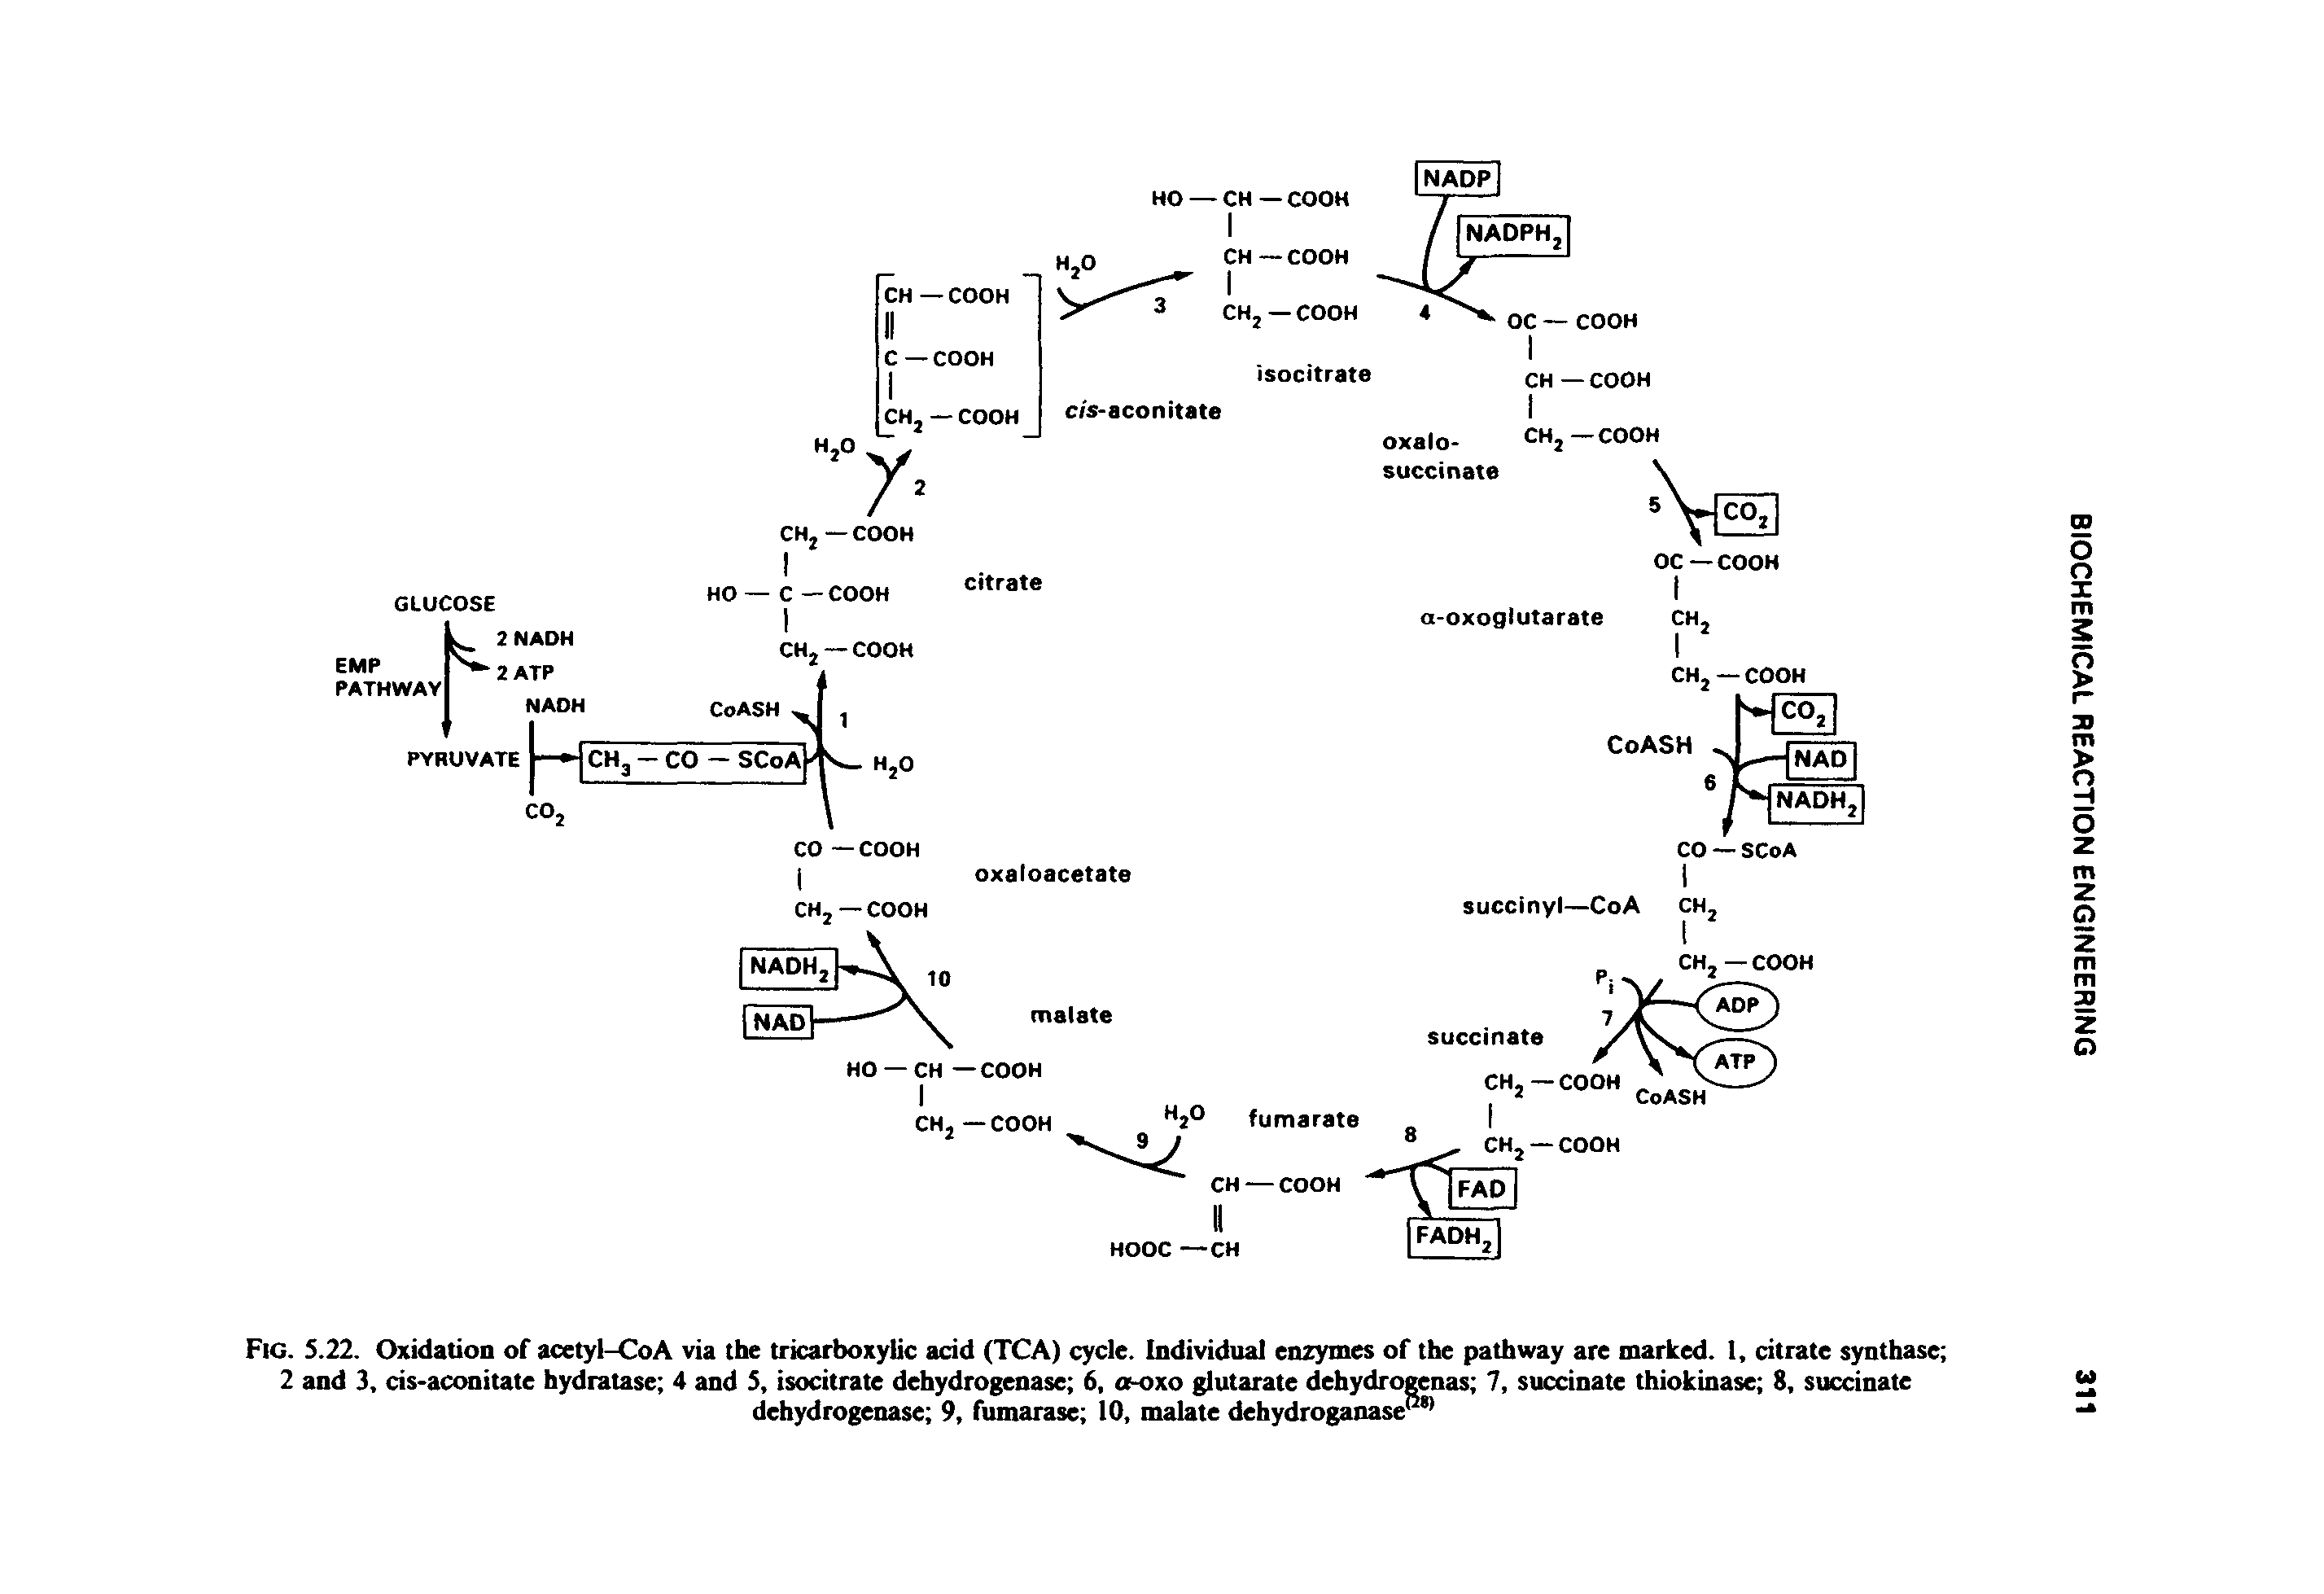 Fig. 5.22. Oxidation of acetyl-CoA via the tricarboxylic acid (TCA) cycle. Individual enzymes of the pathway are marked. 1, citrate synthase 2 and 3, cis-aconitate hydratase 4 and 3, isocitrate dehydrogenase 6, a-oxo glutarate dehydrogenas 7, succinate thiokinase 8, succinate...